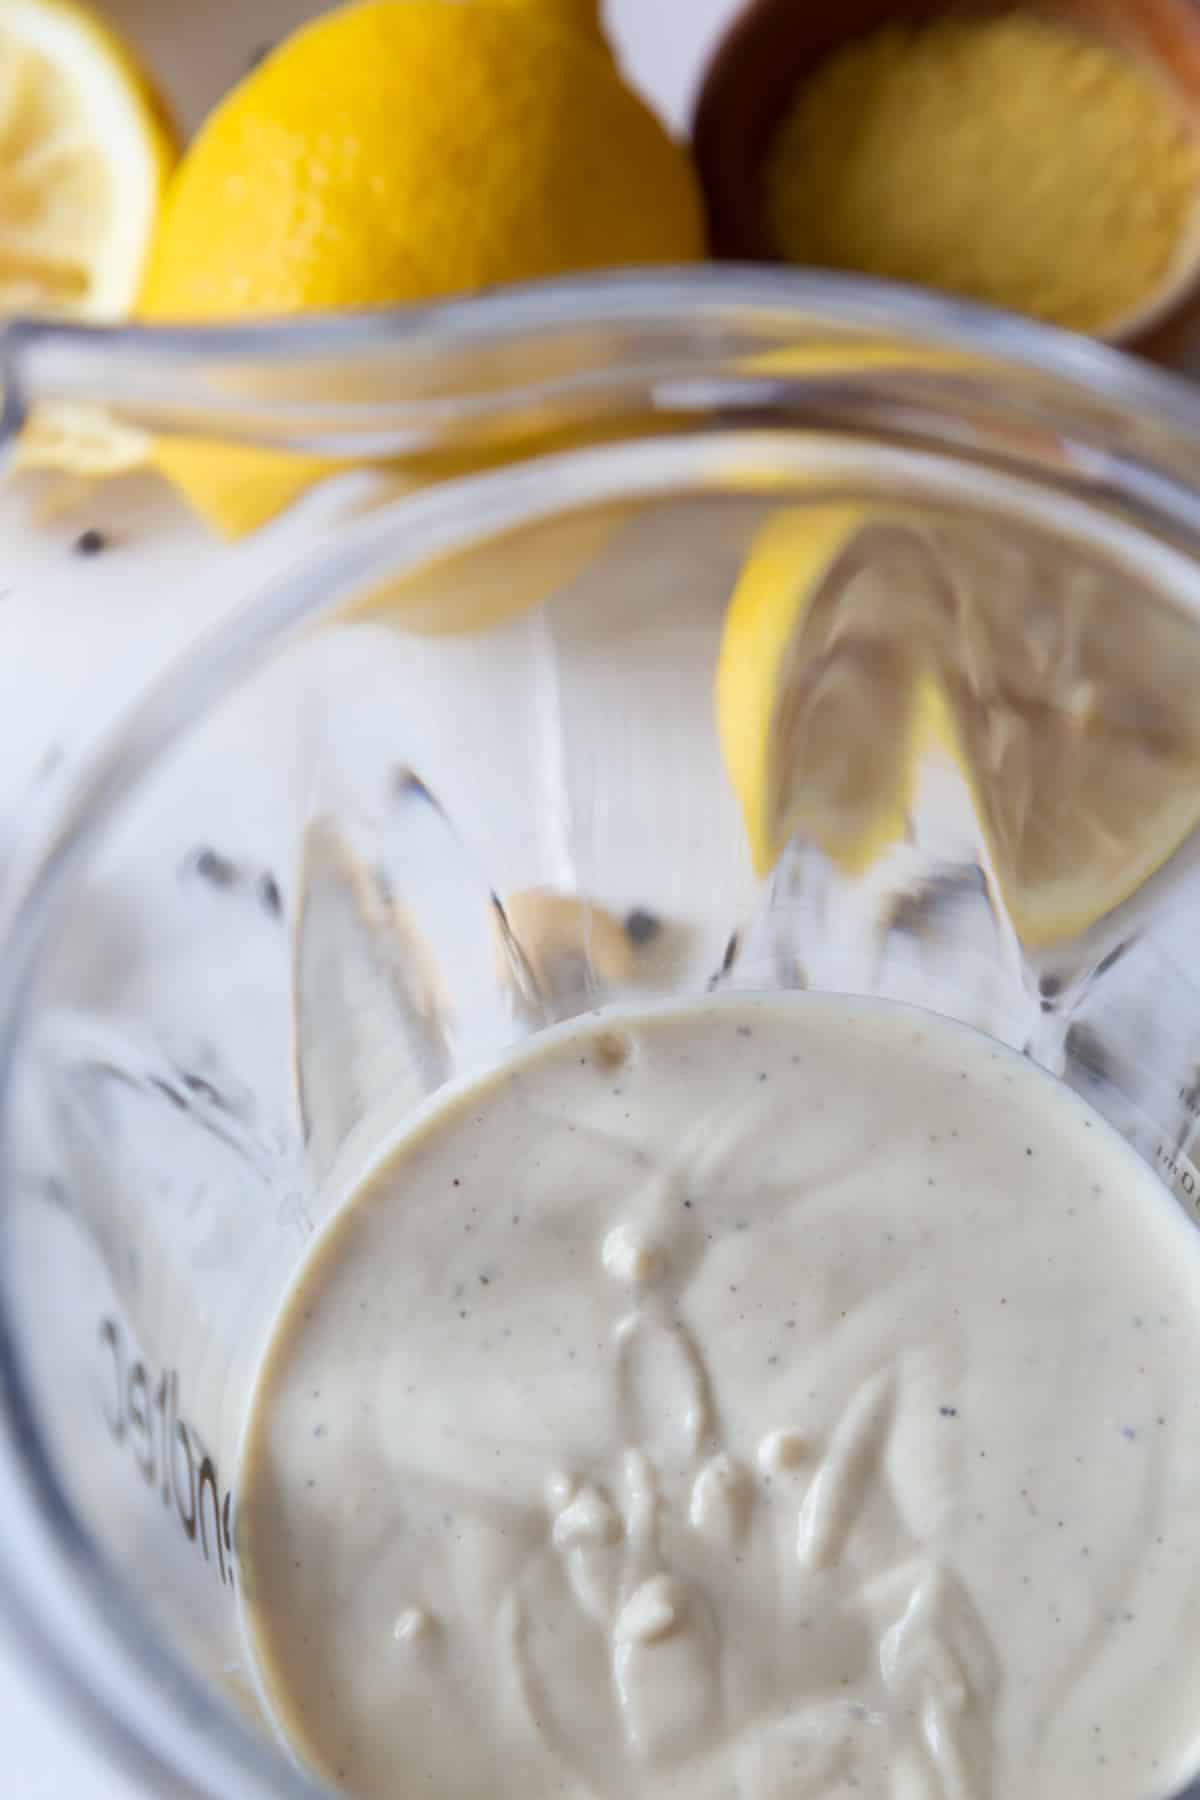 Alfredo sauce in a blender with lemons next to the blender.